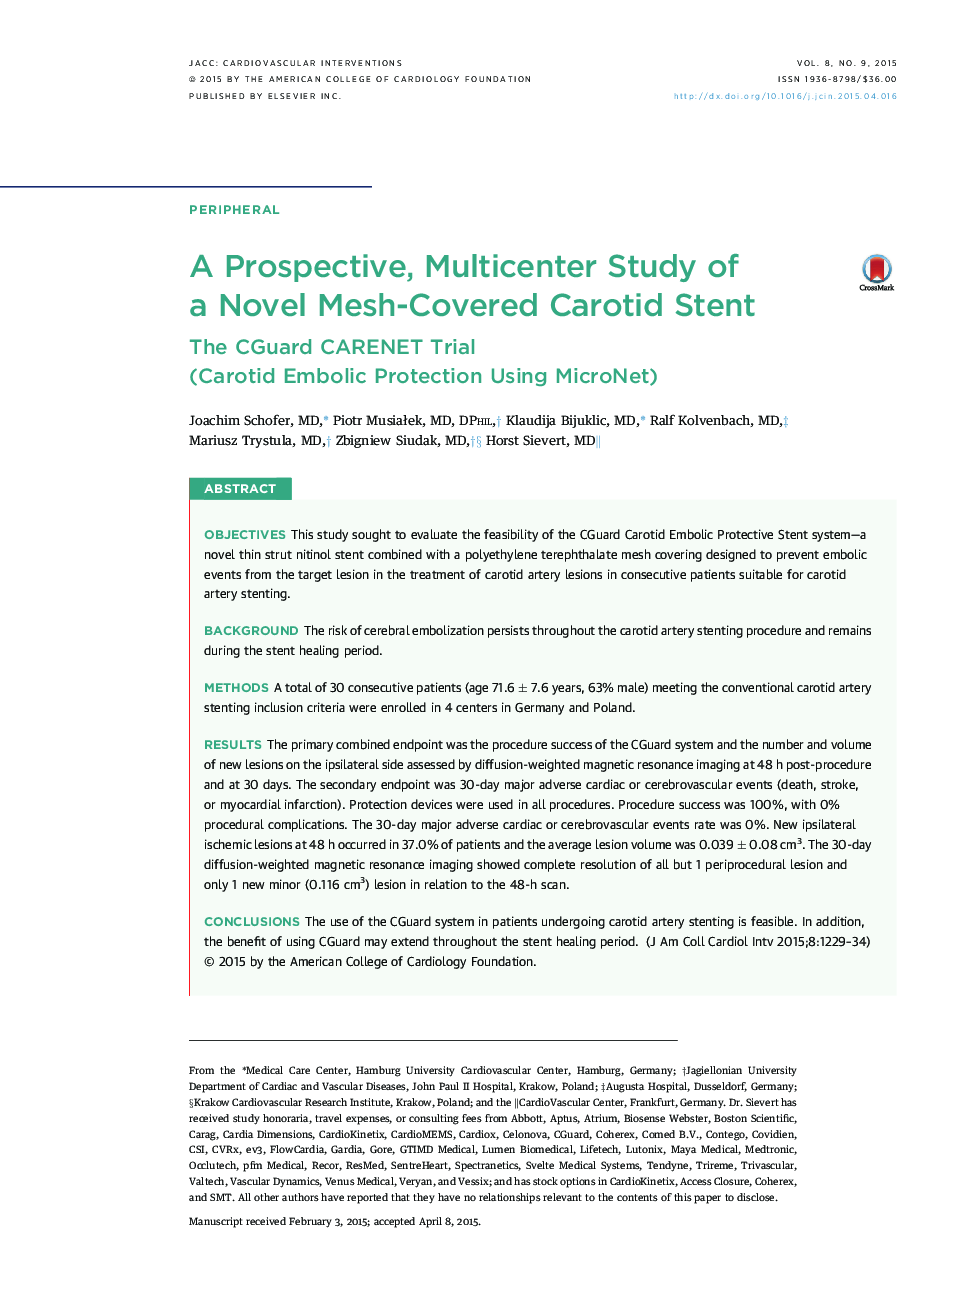 A Prospective, Multicenter Study of aÂ Novel Mesh-Covered Carotid Stent: The CGuard CARENET Trial (Carotid Embolic Protection UsingÂ MicroNet)